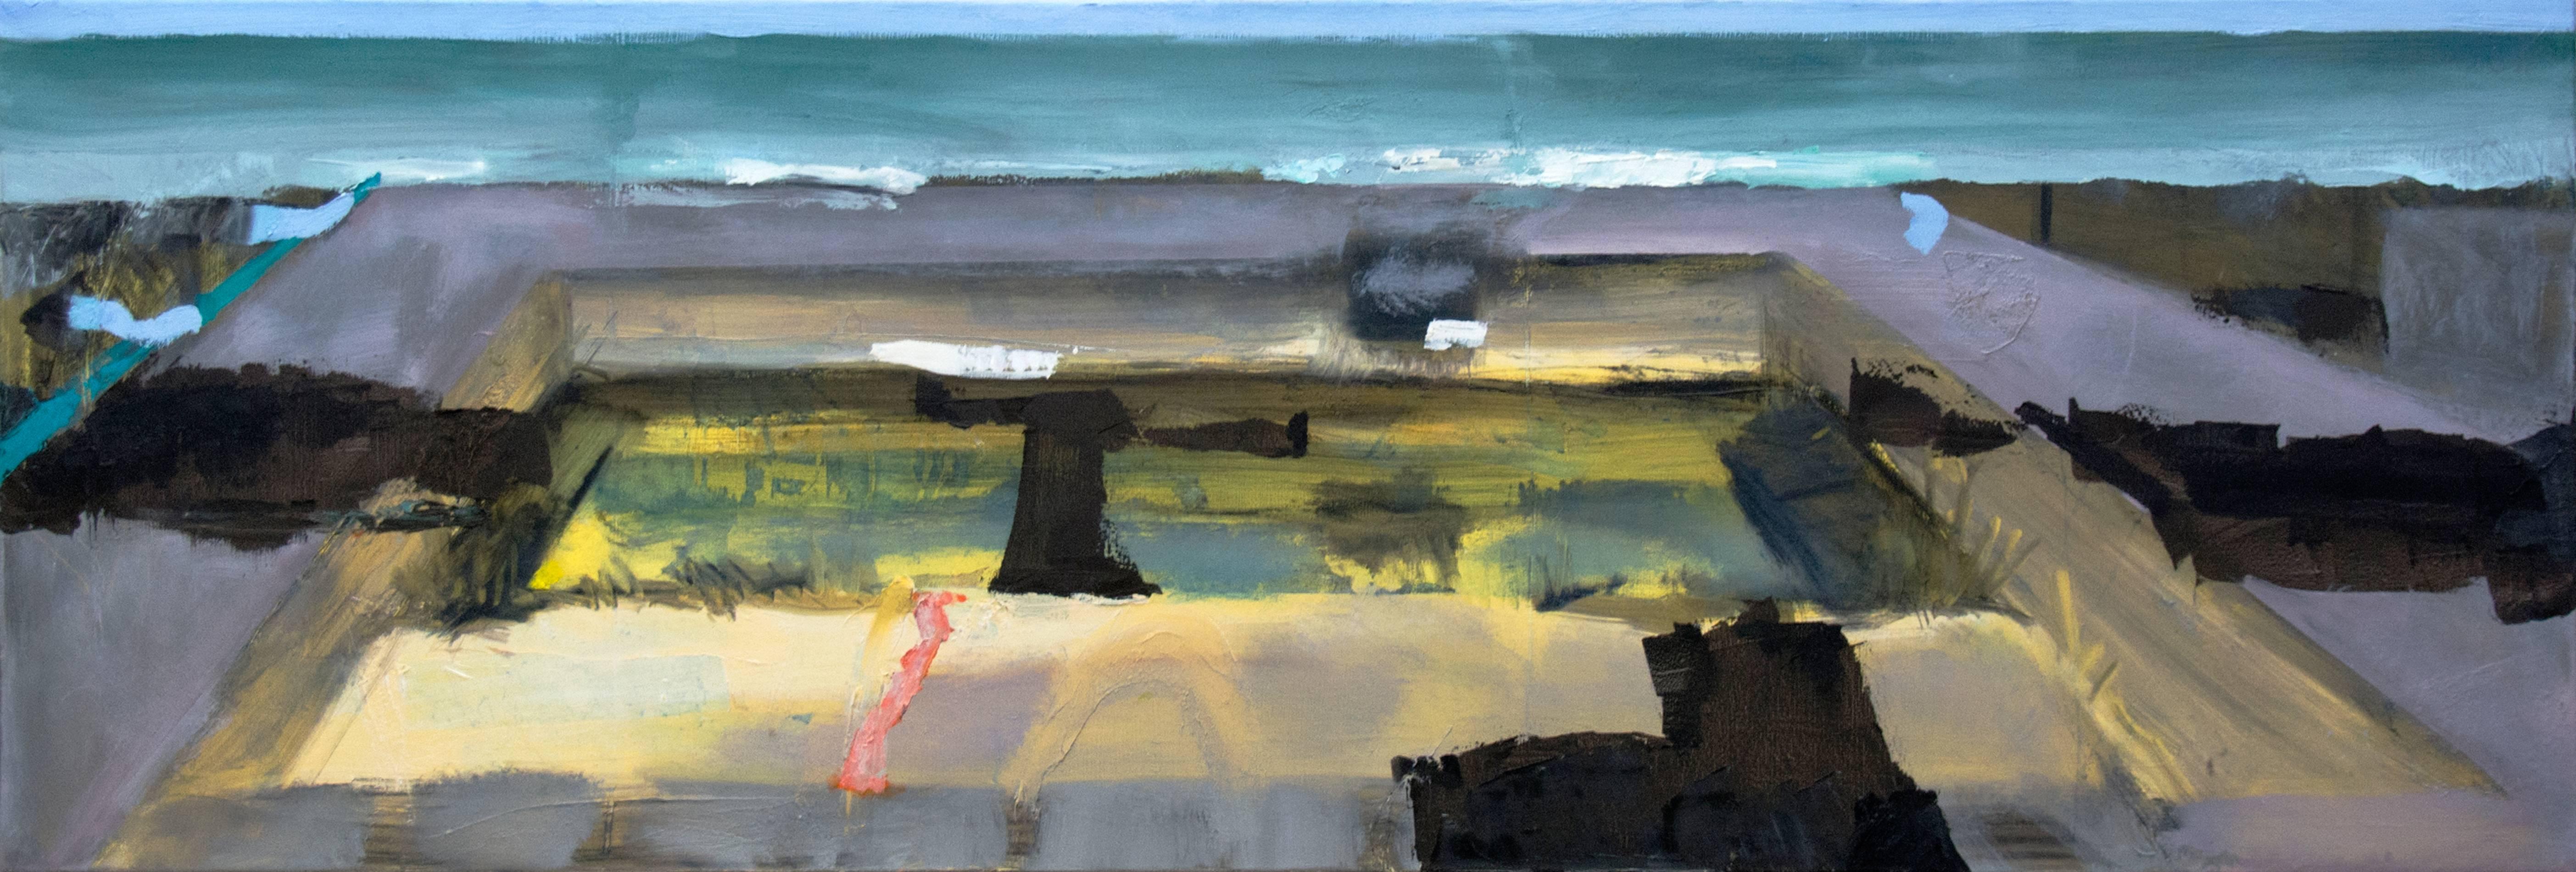 Simon Andrew Landscape Painting - Deserted Pool - abstracted landscape with soft blues, lavender, green and yellow